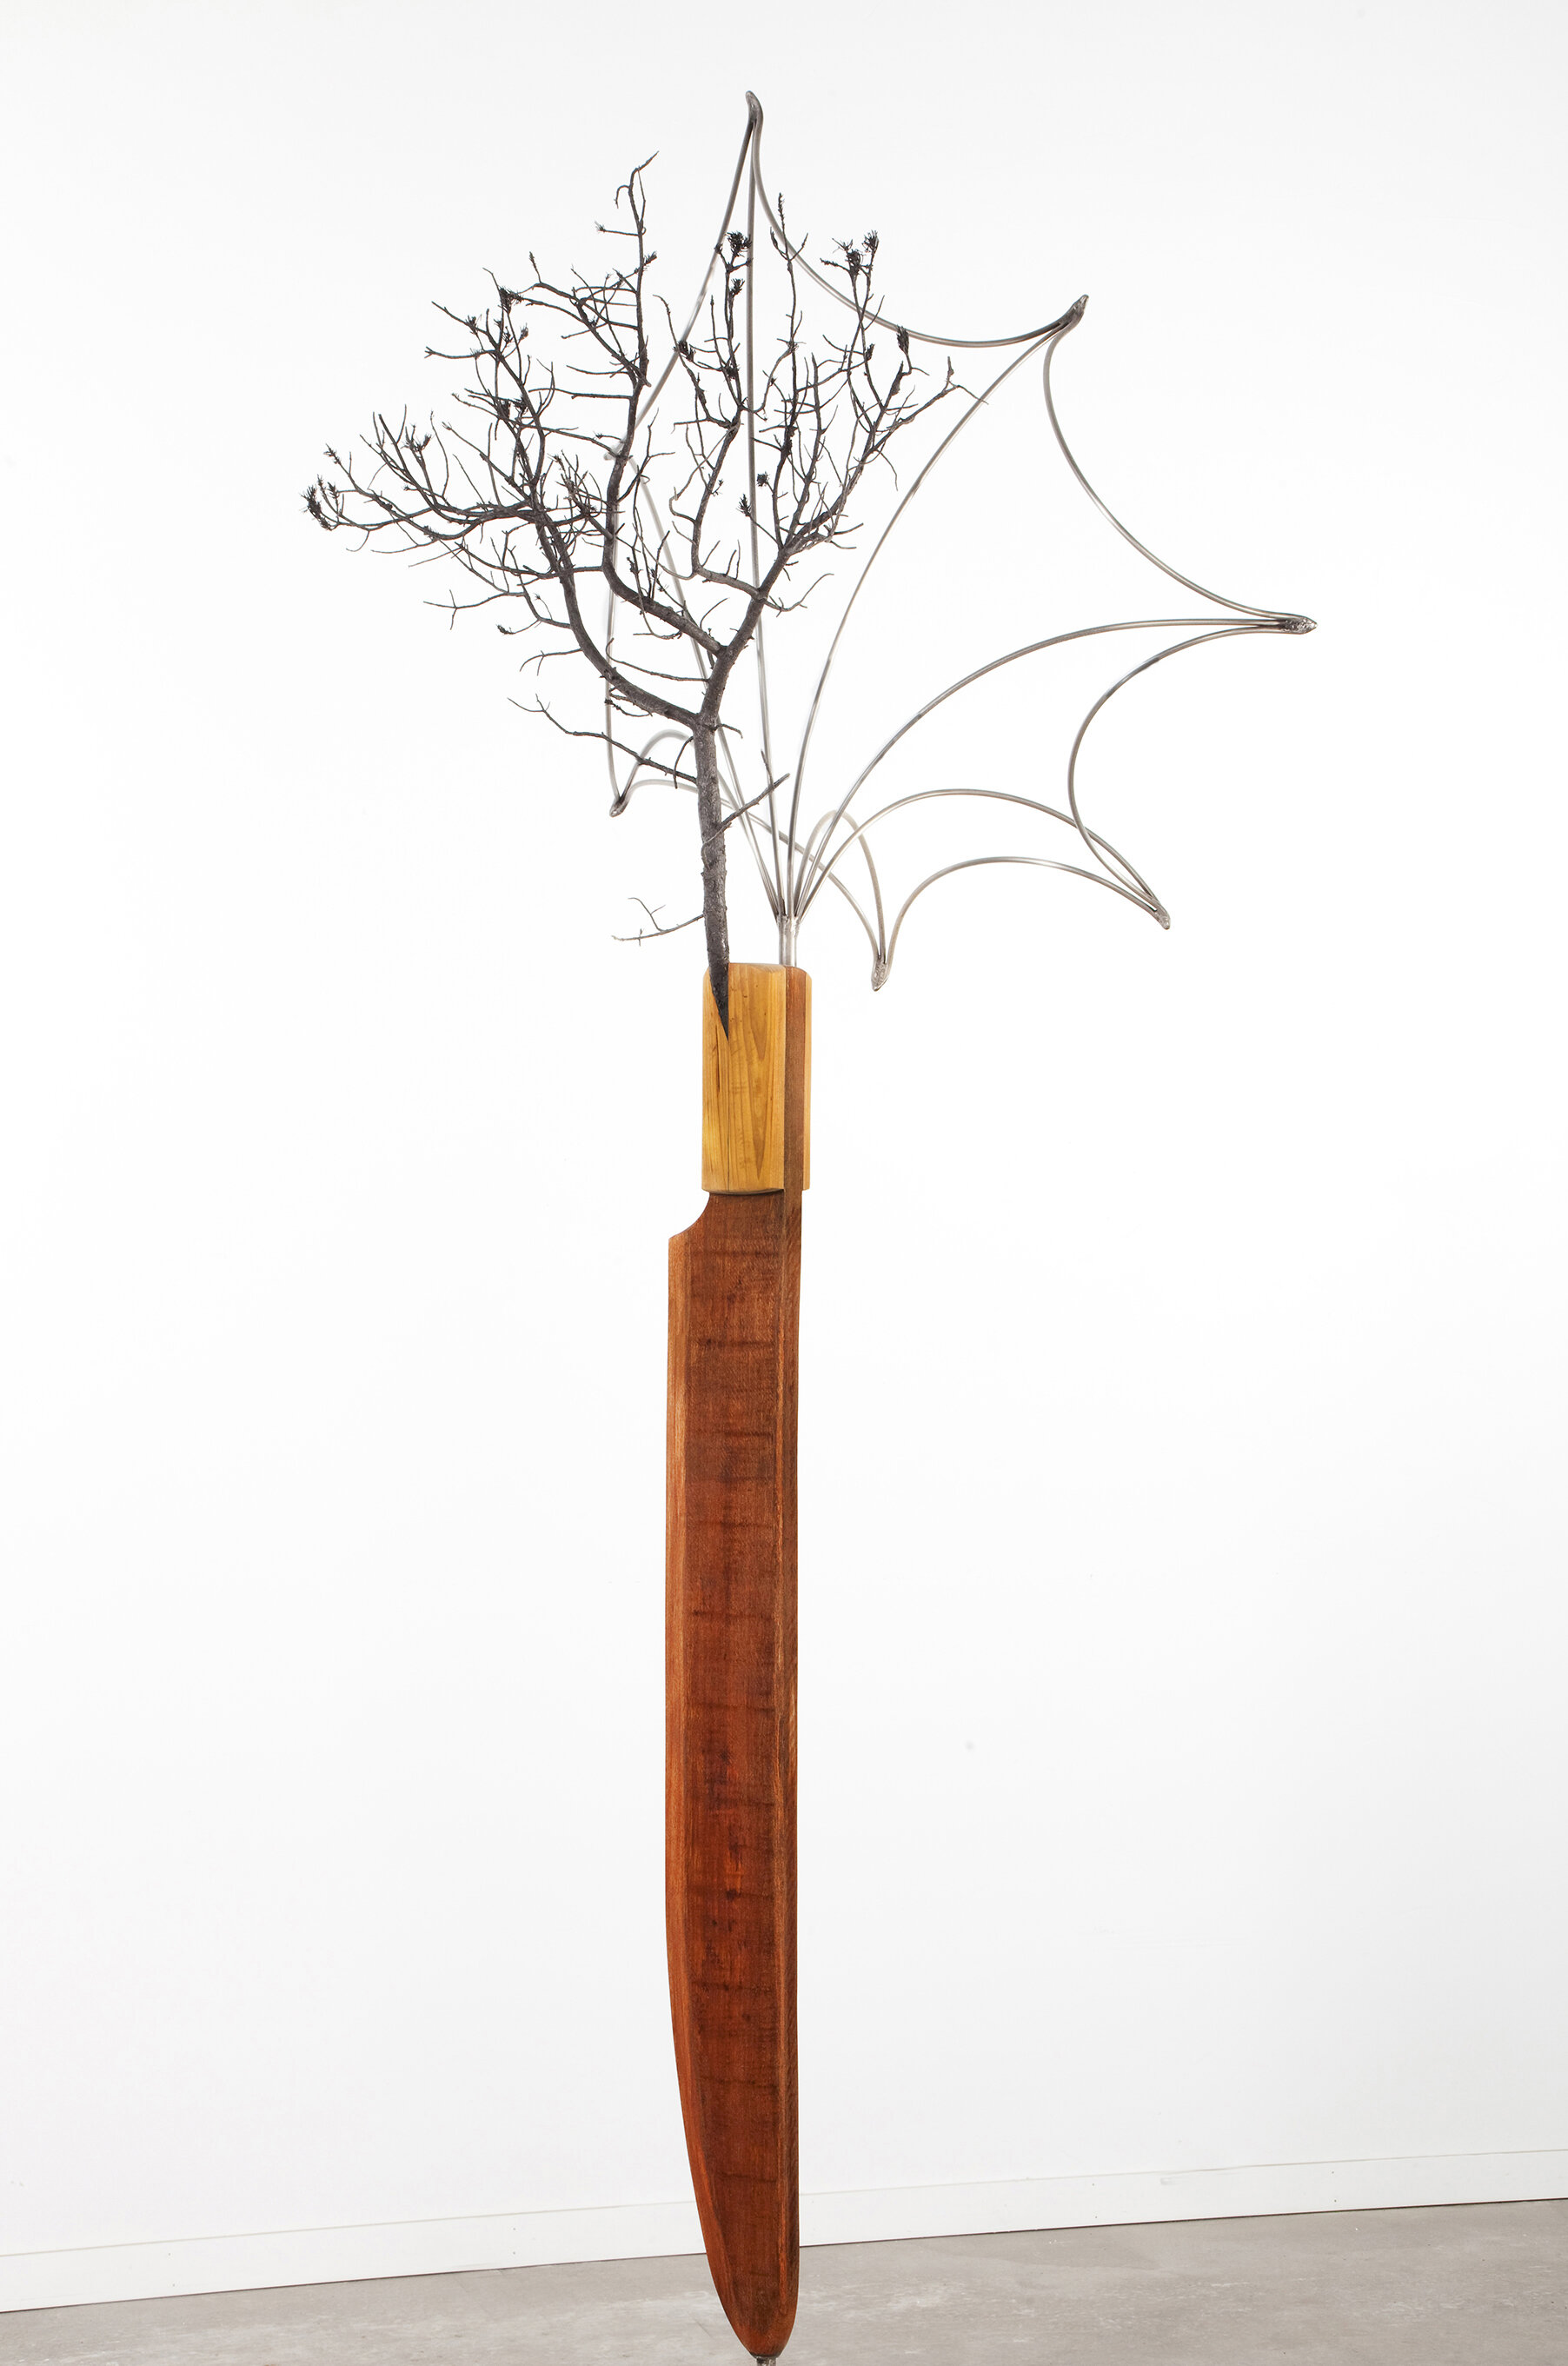 Standing Knife, Pinon and Morning Glory, 2009